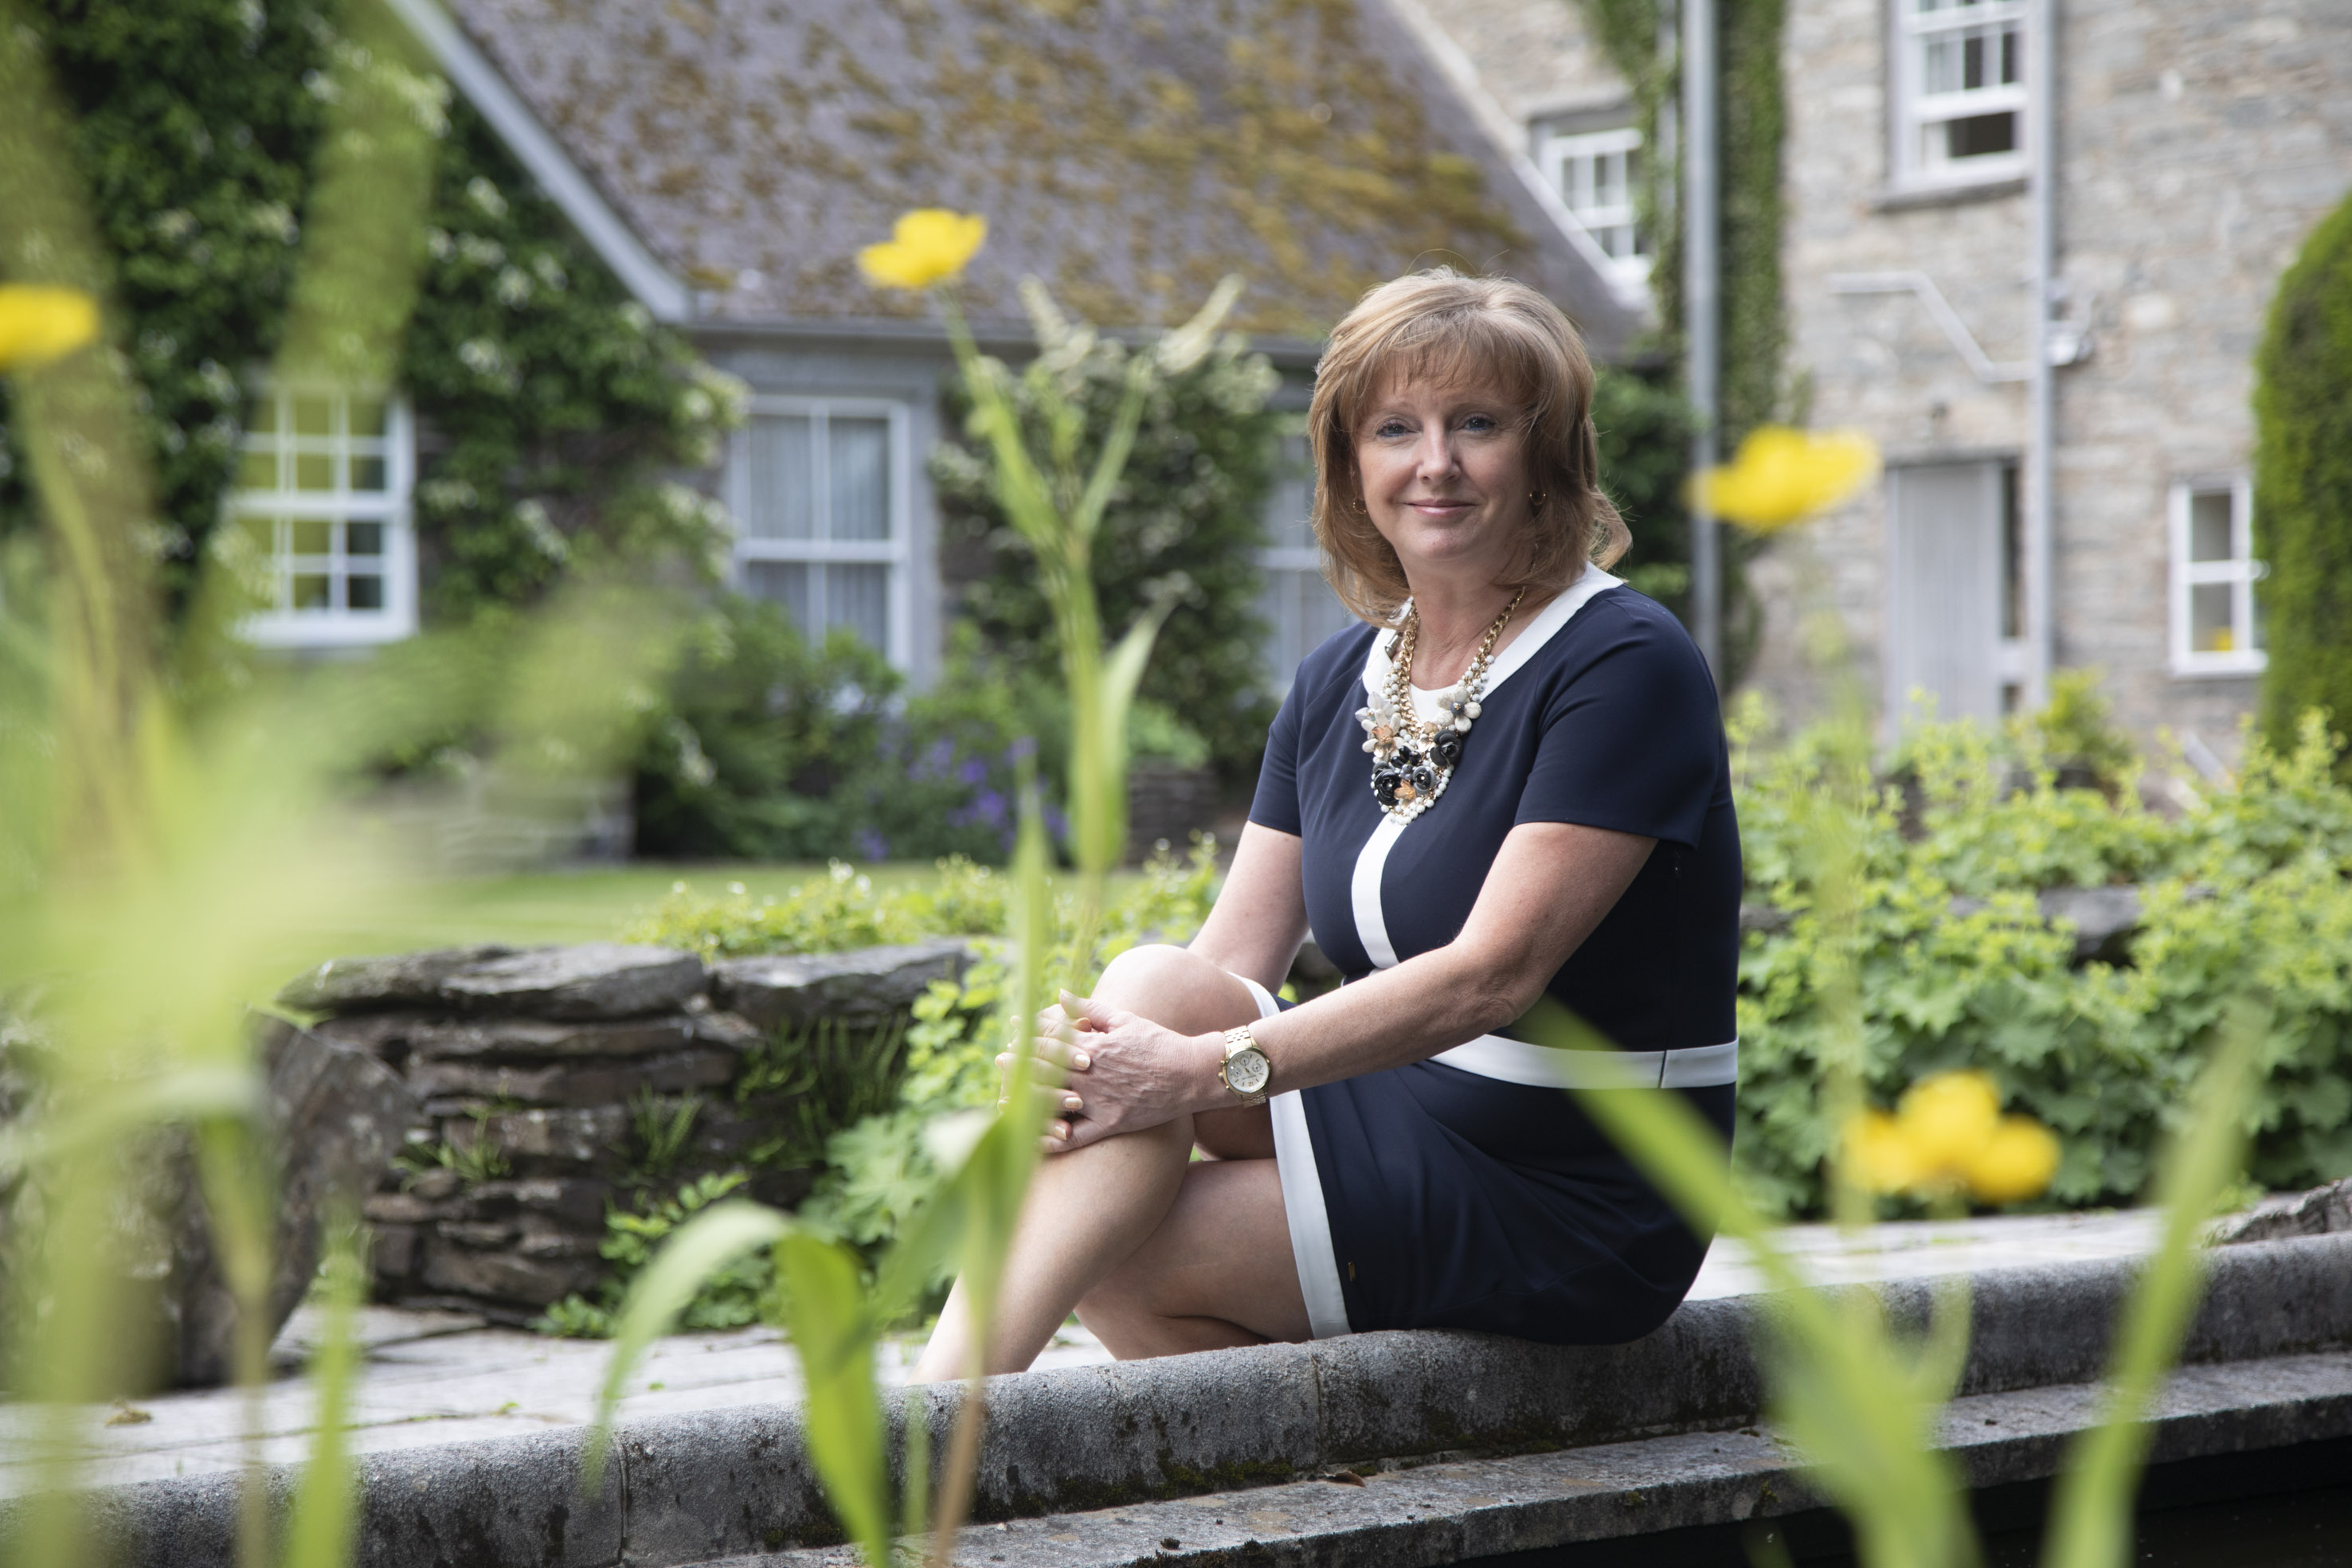 Michelin restaurant boss Susan back in business after life-changing knee op